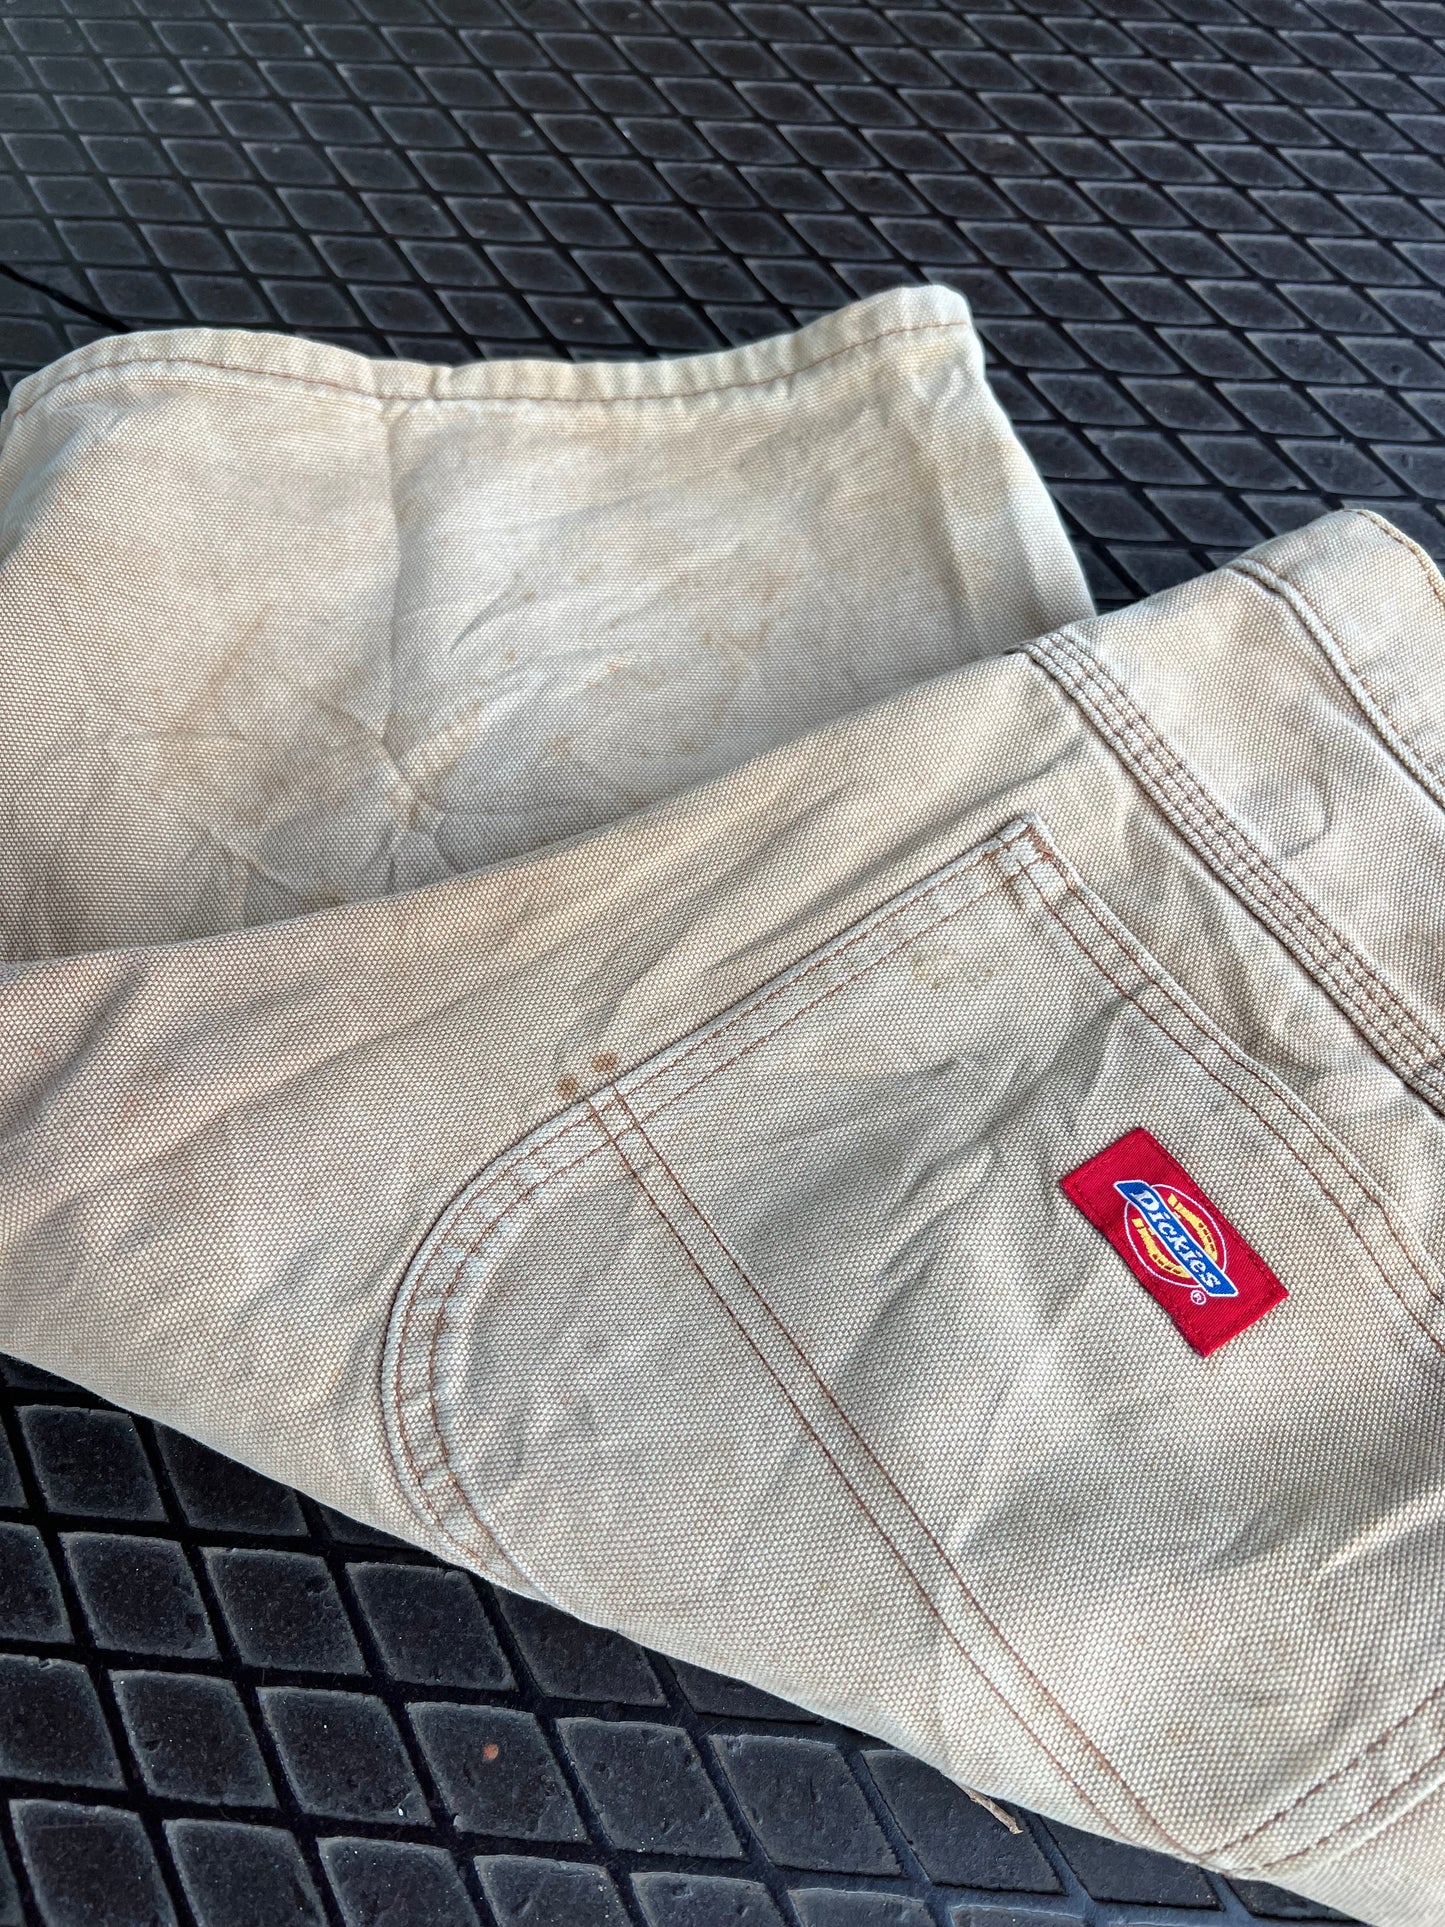 34 - Dickies Relaxed Fit Beige Carpenter Shorts